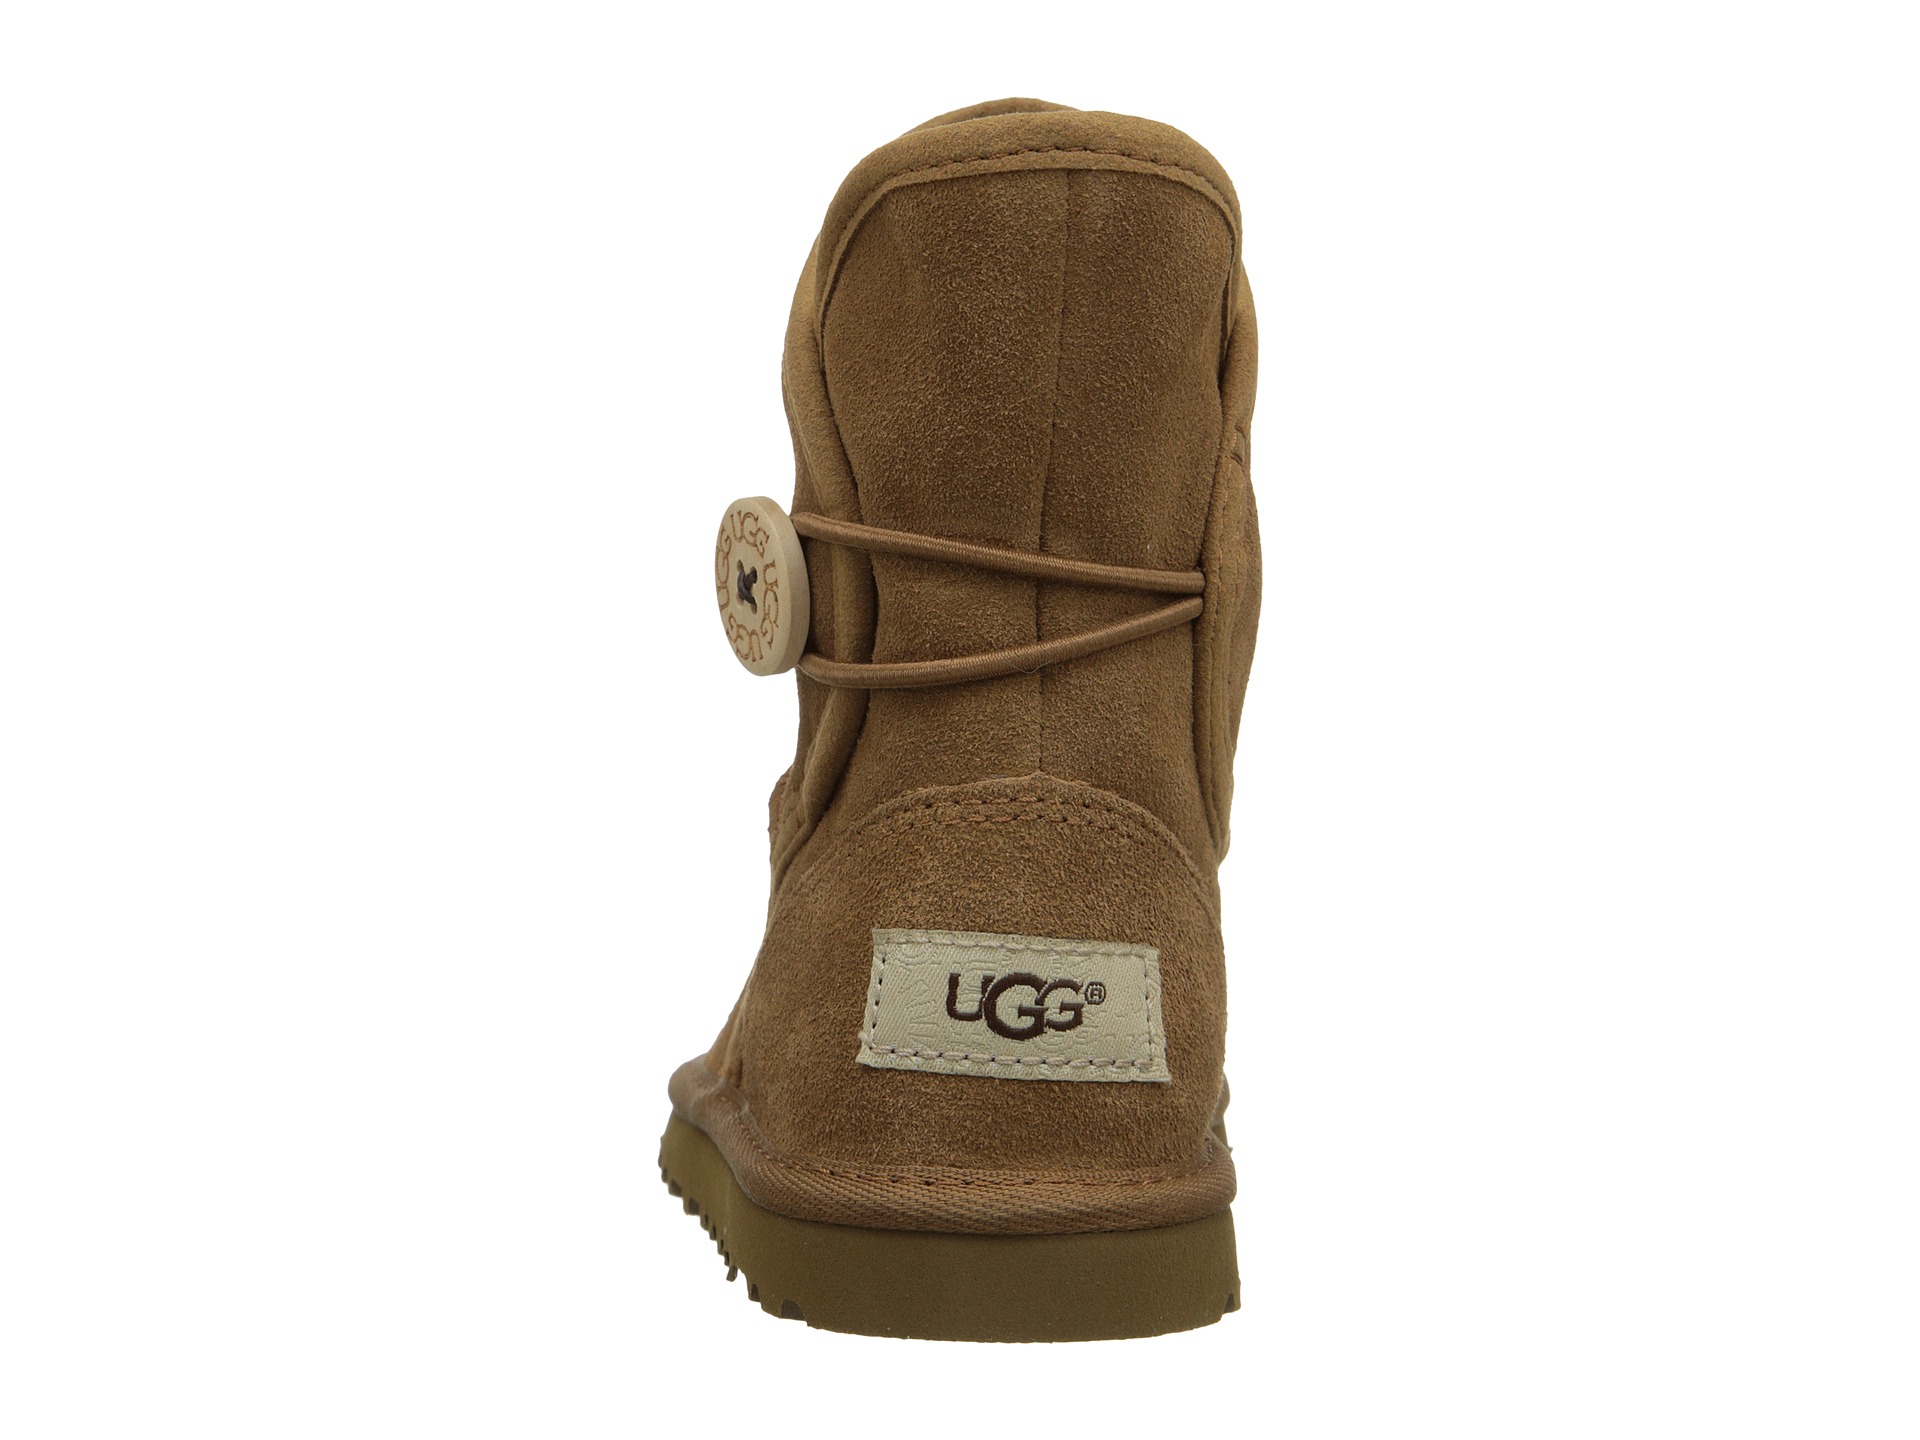 Infant Uggs Amazon | Division of Global Affairs